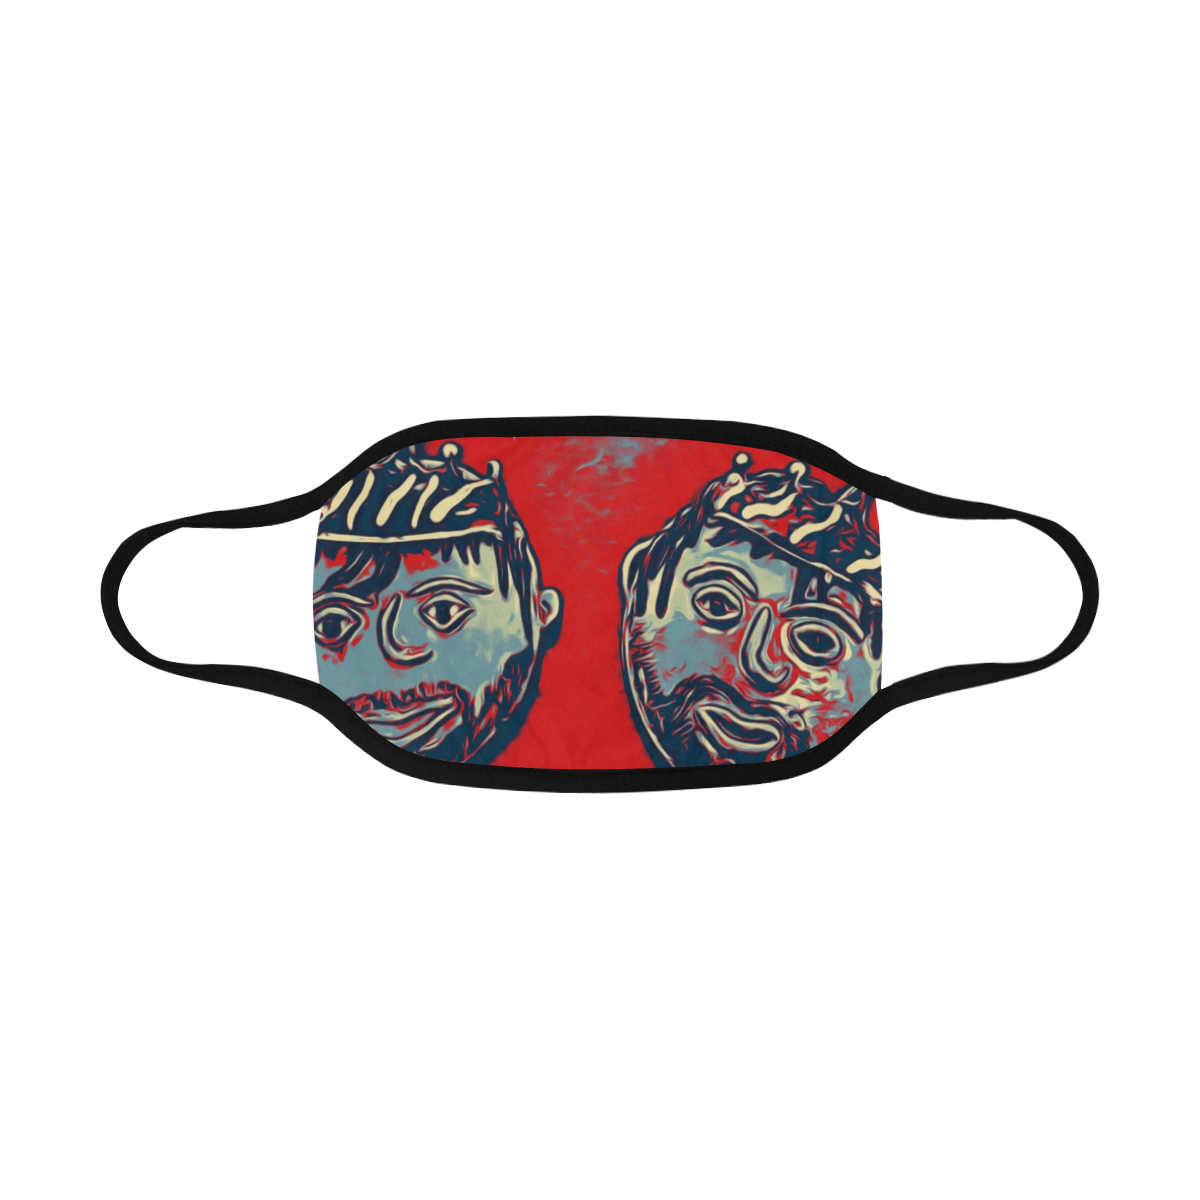 2 KING'S Mouth Mask